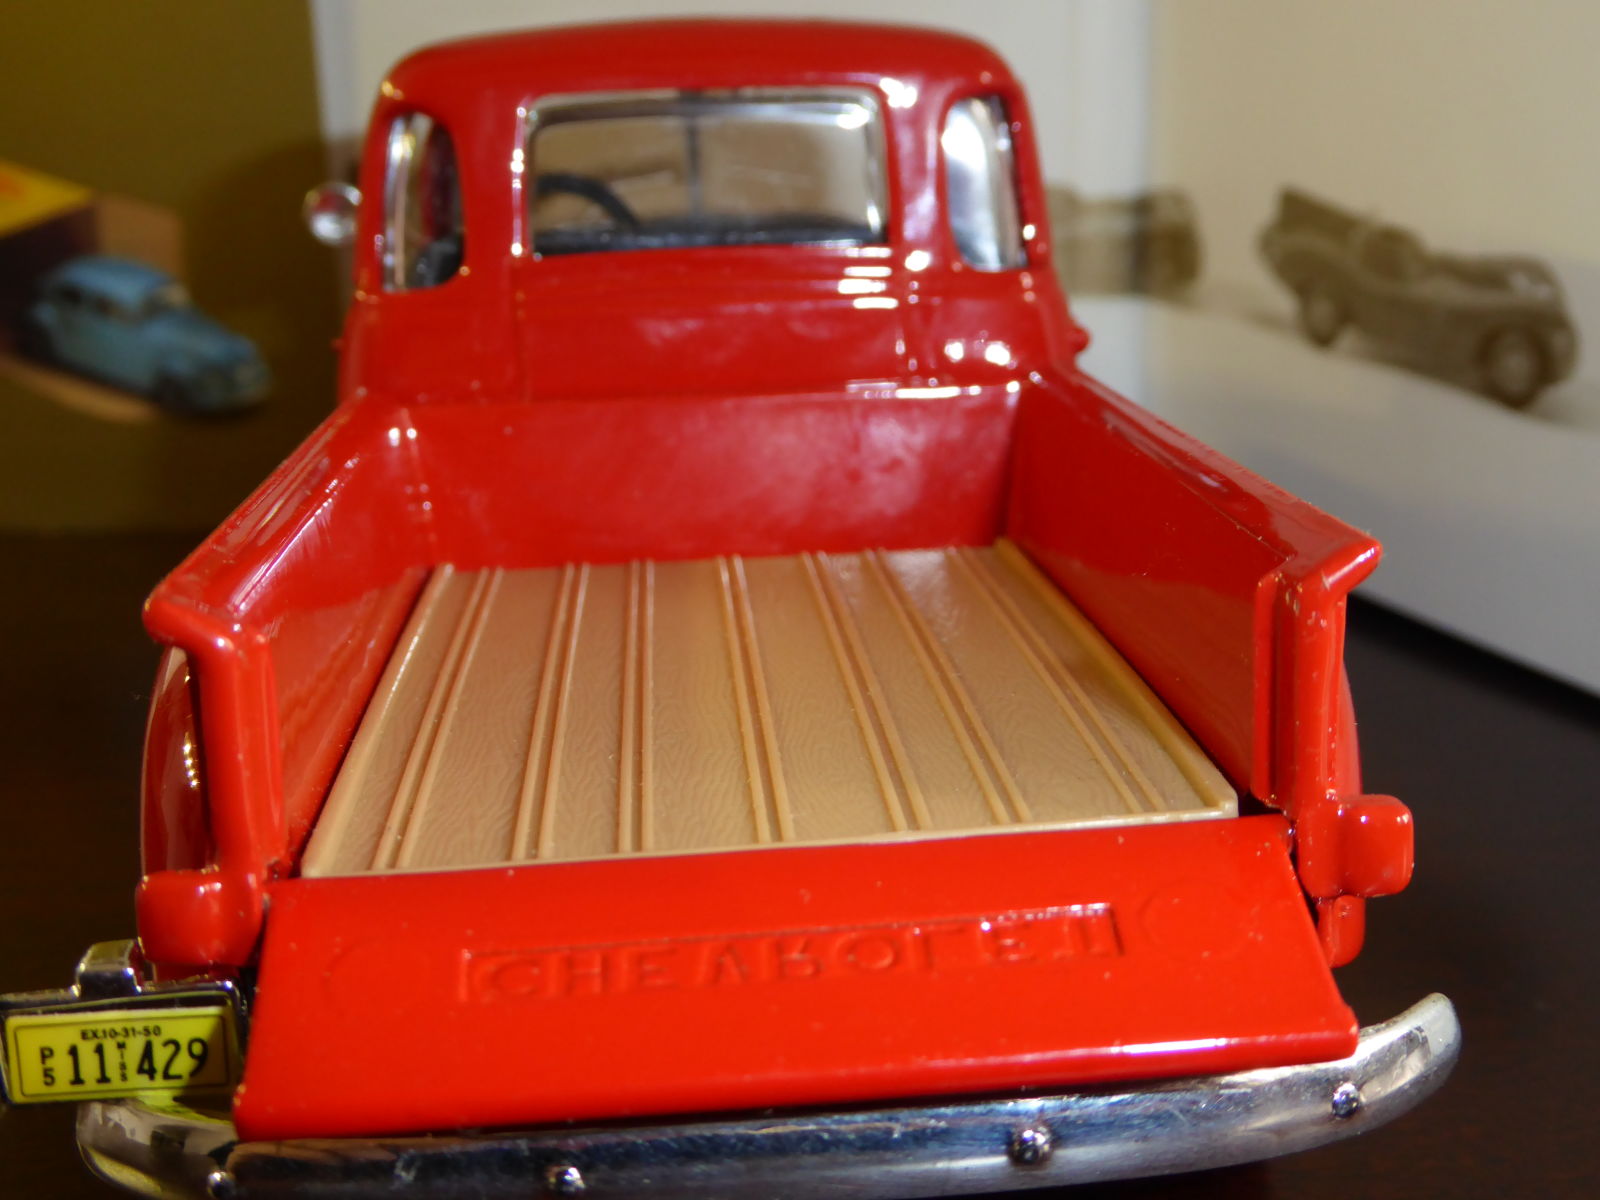 The tail gate can be opened and the floor bed is molded in one color.